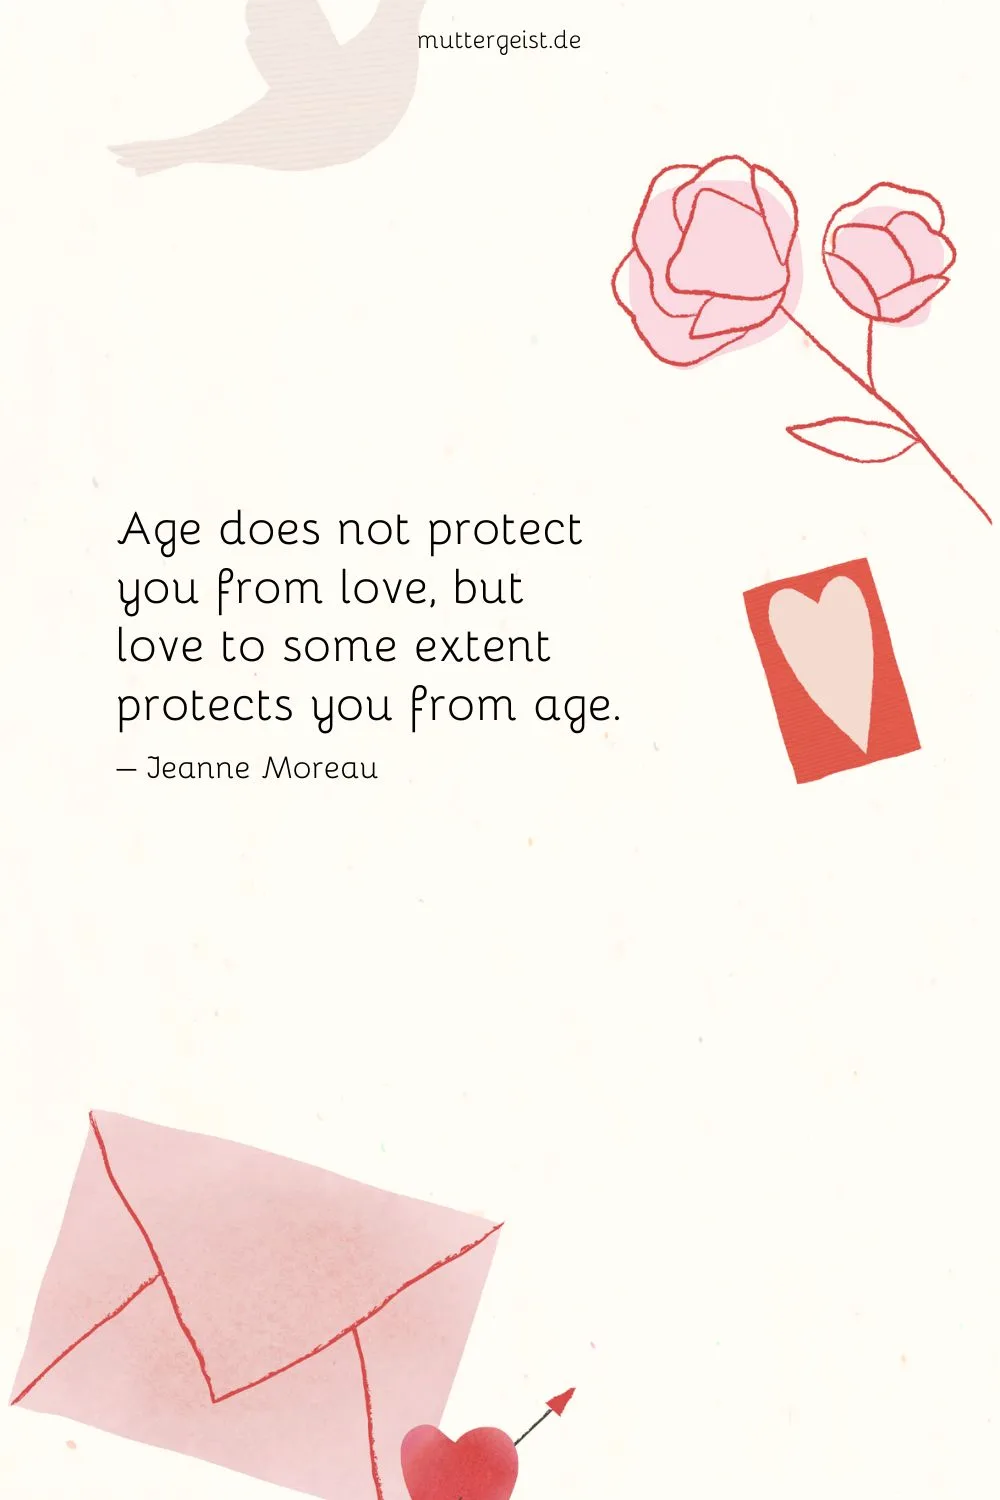 Age does not protect you from love, but love to some extent protects you from age